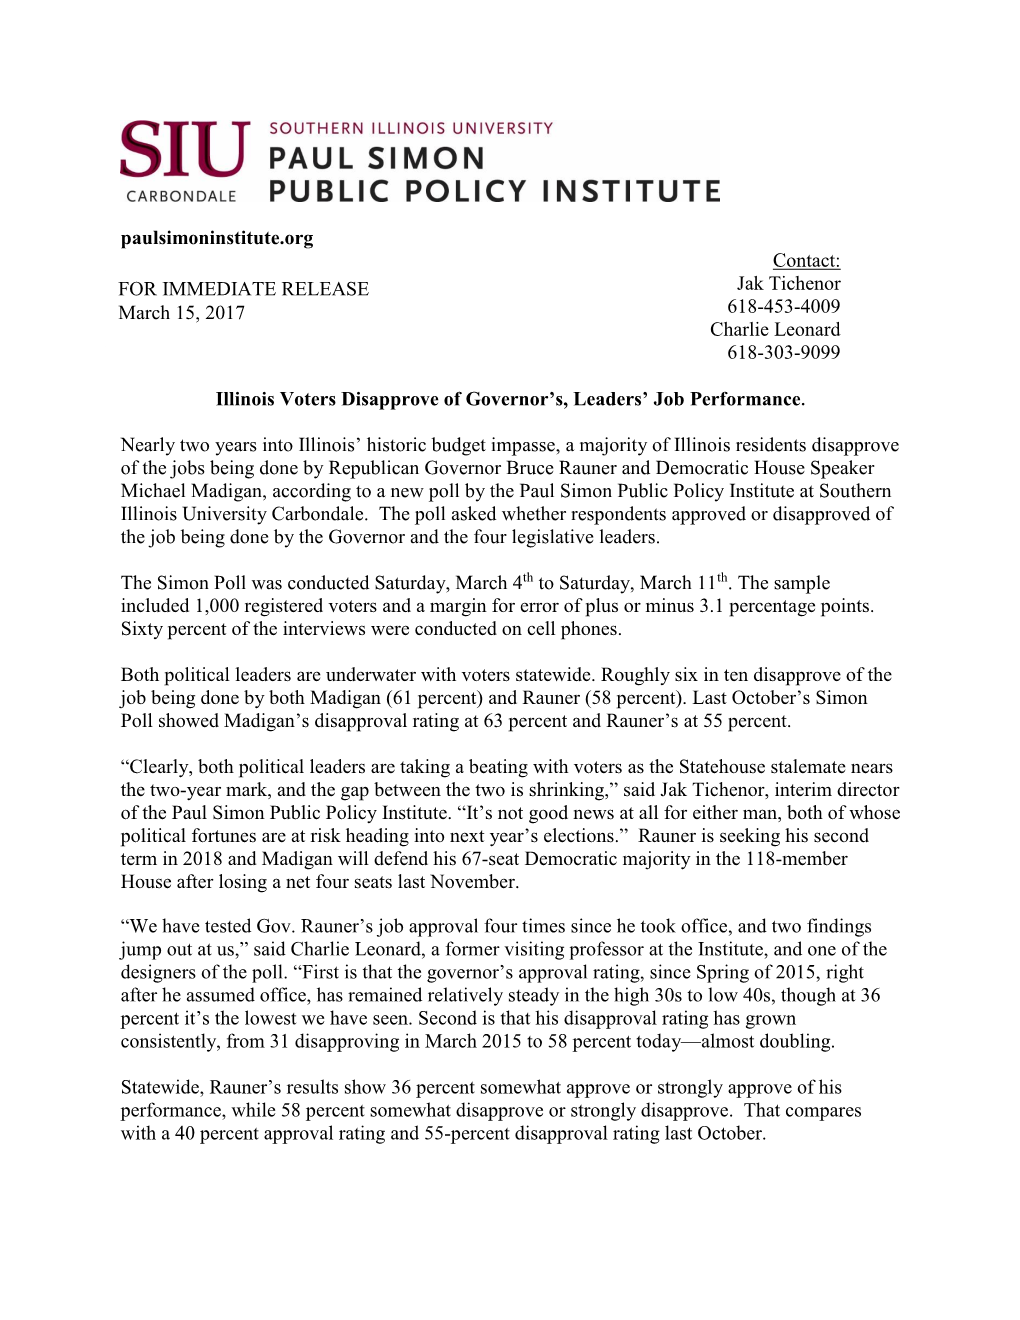 A New Poll by the Paul Simon Public Policy Institute at Southern Illinois University Carbondale